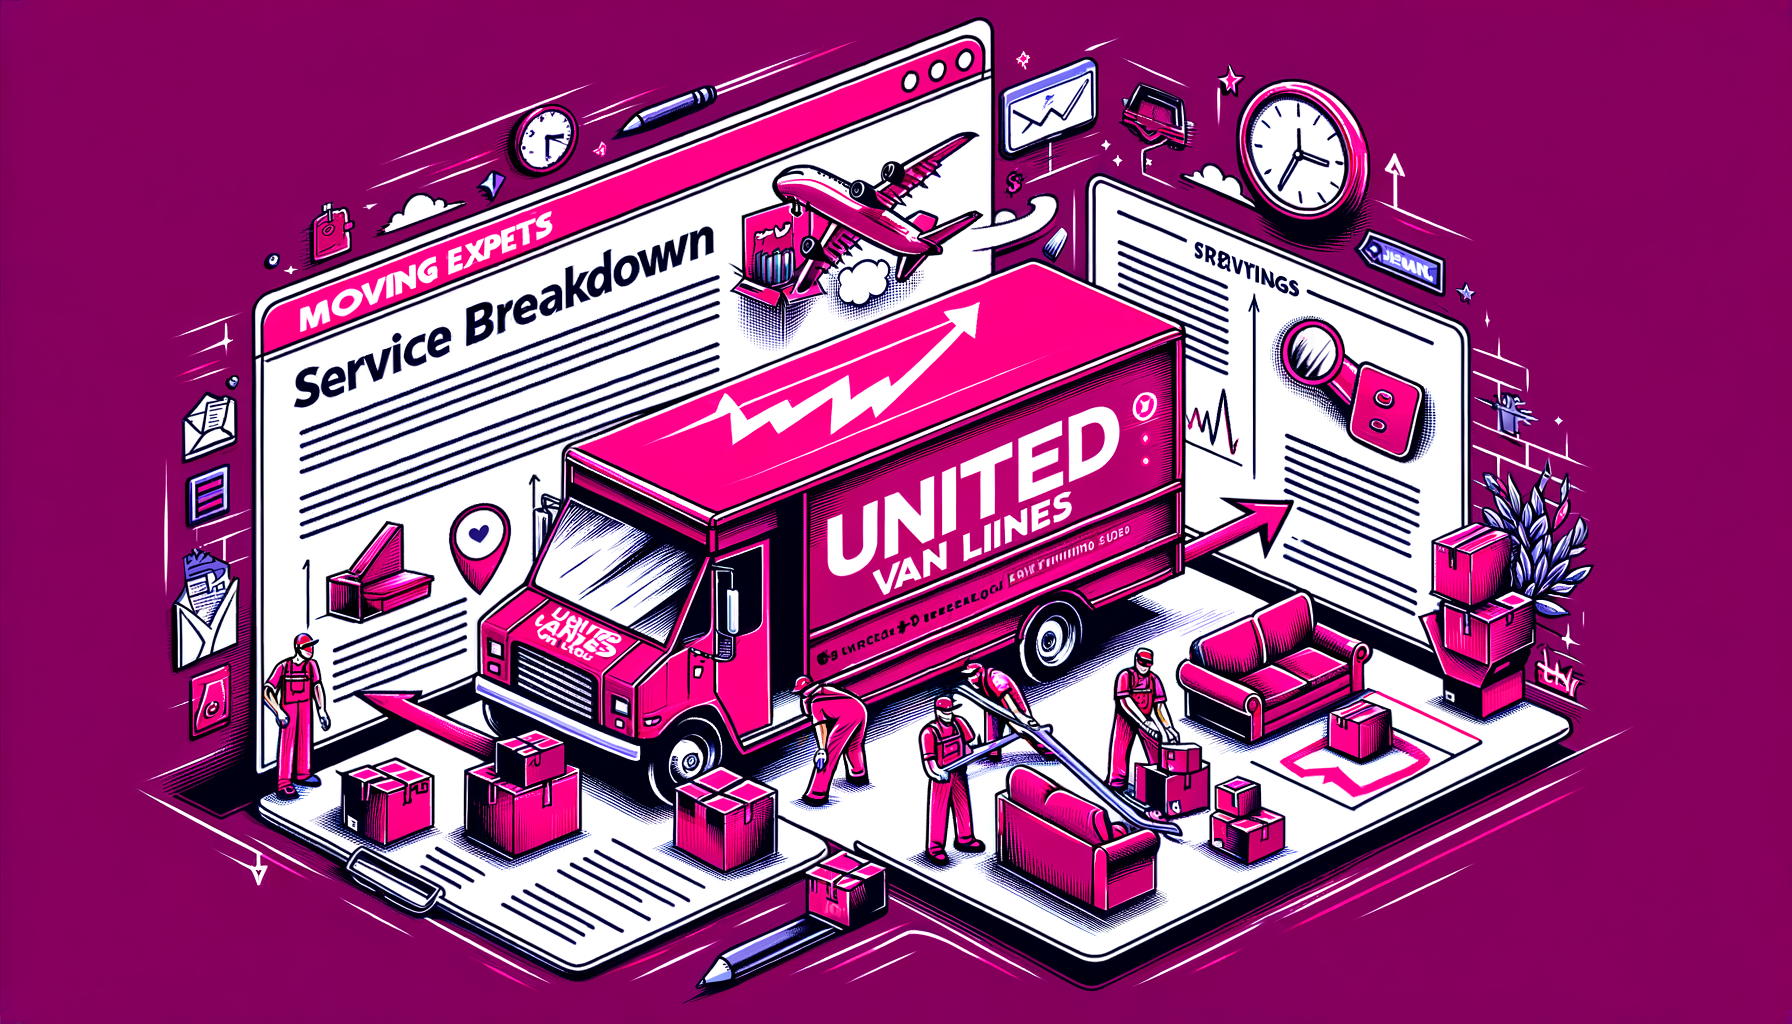 Cartoon-like fuschia illustration showcasing United Van Lines moving services, including packing, transportation, and unpacking.